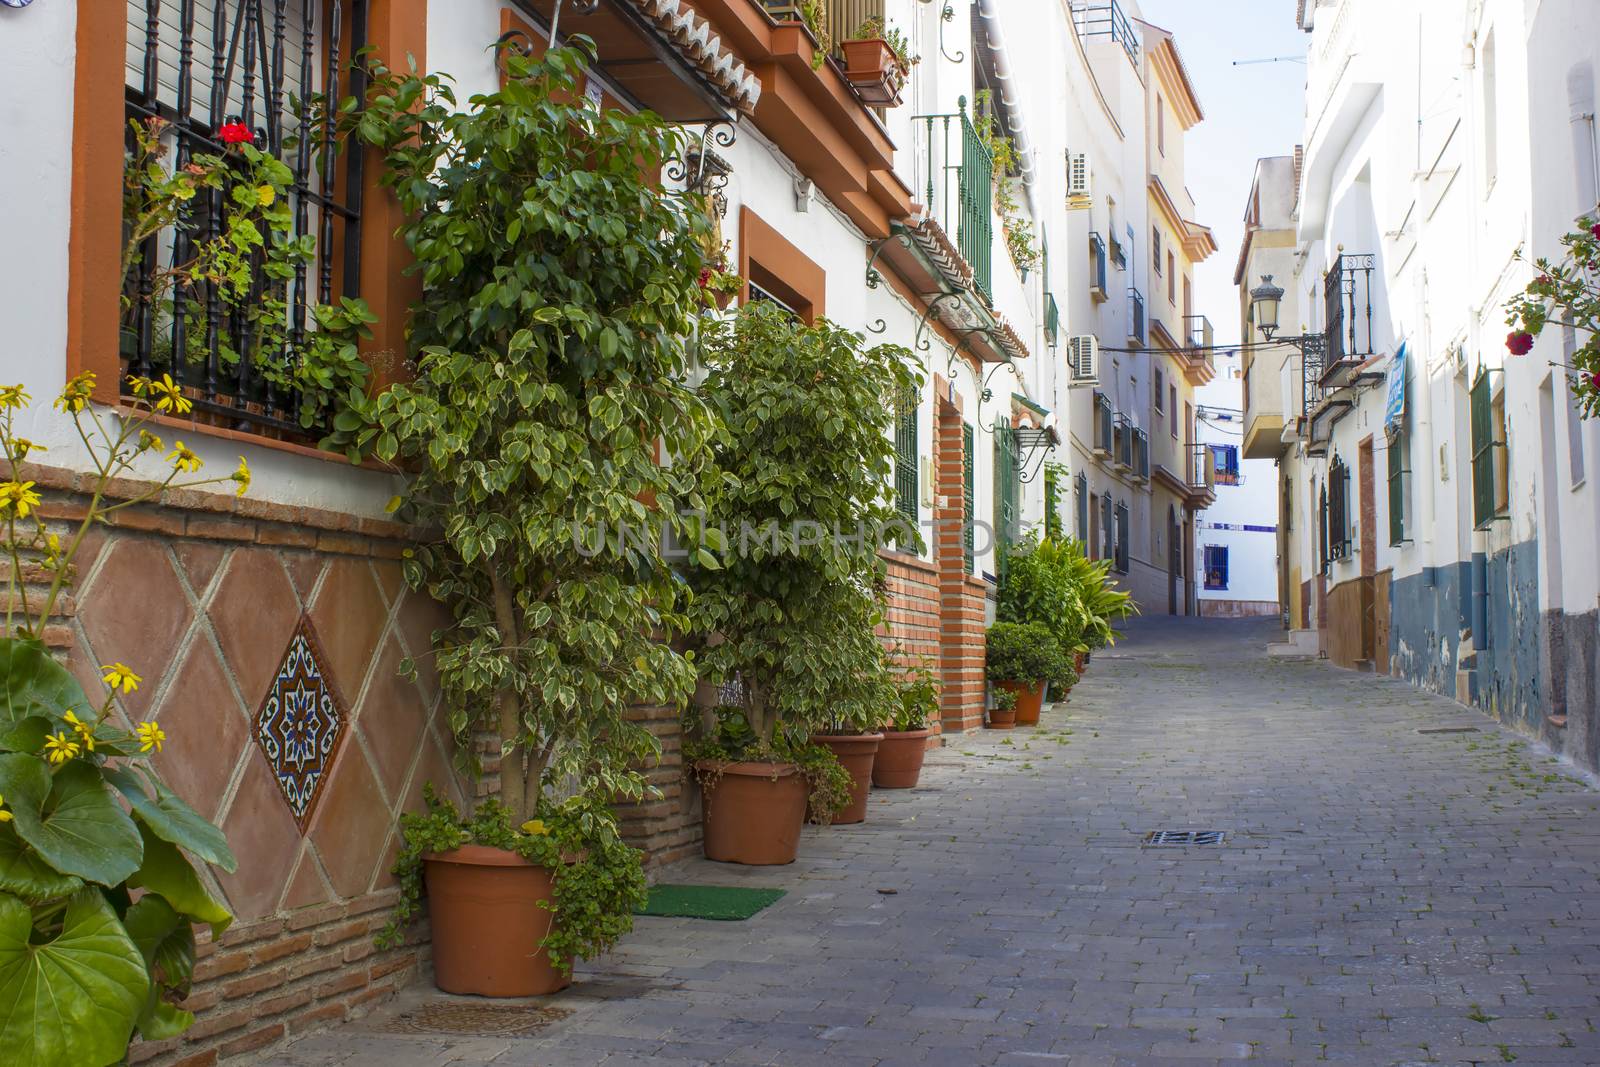 Street in Almunecar Andalusia, Spain by miradrozdowski